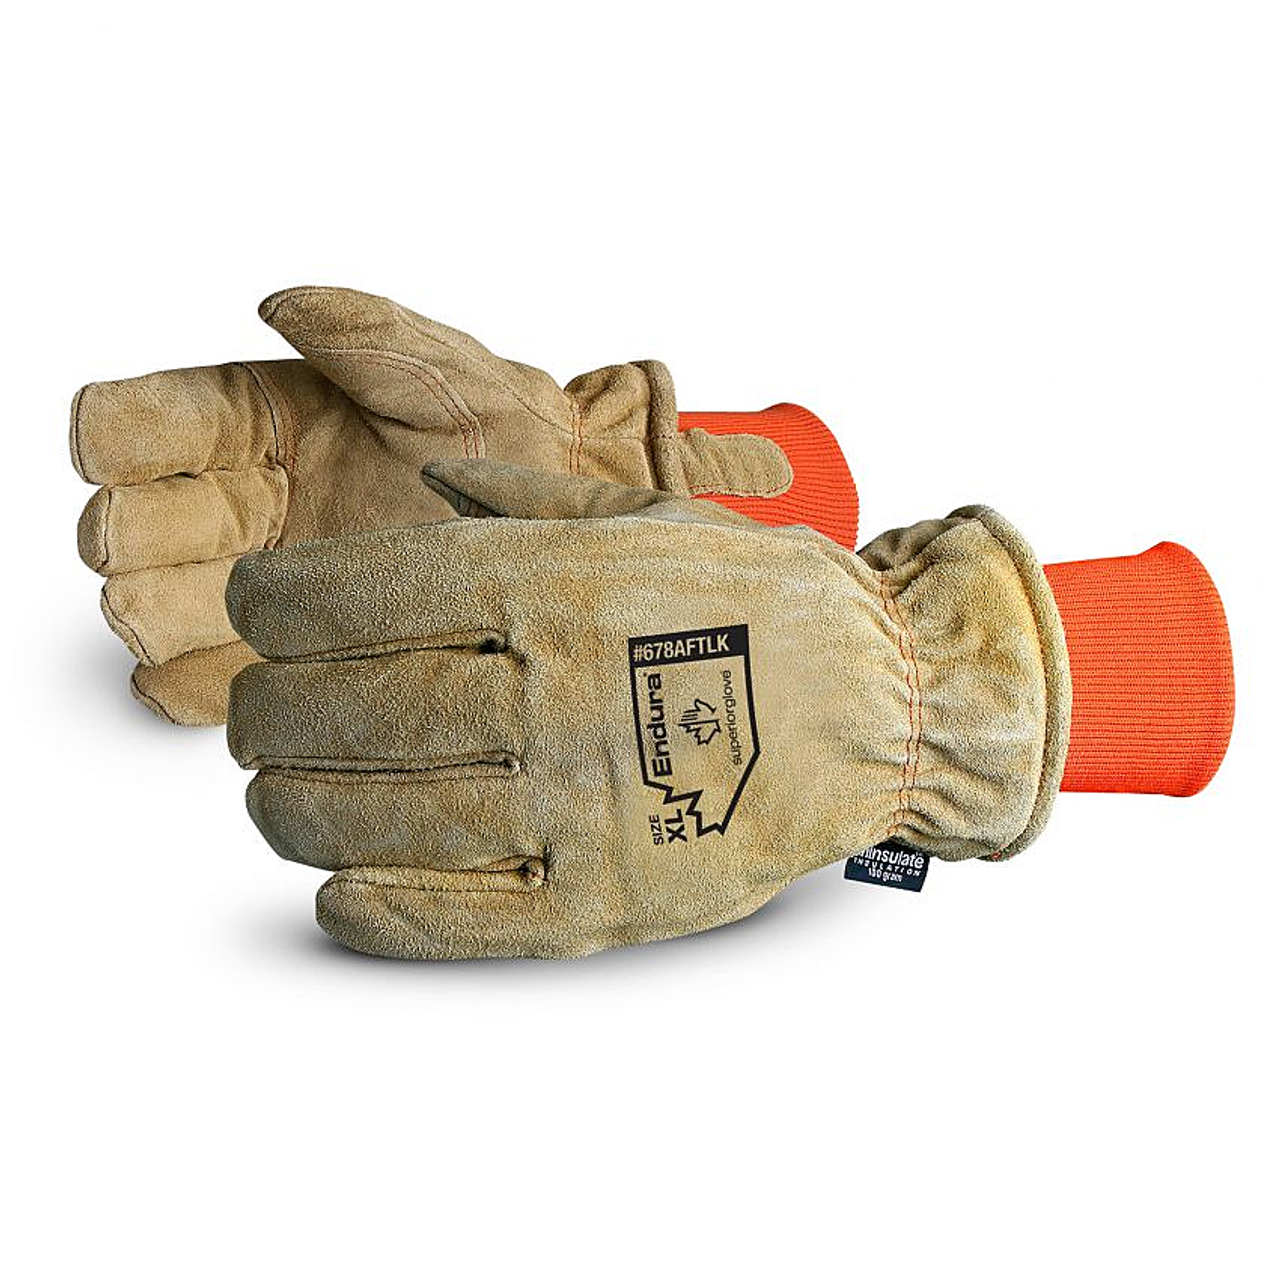 FIRM GRIP Large Winter Safety Pro Gloves with Thinsulate Liner